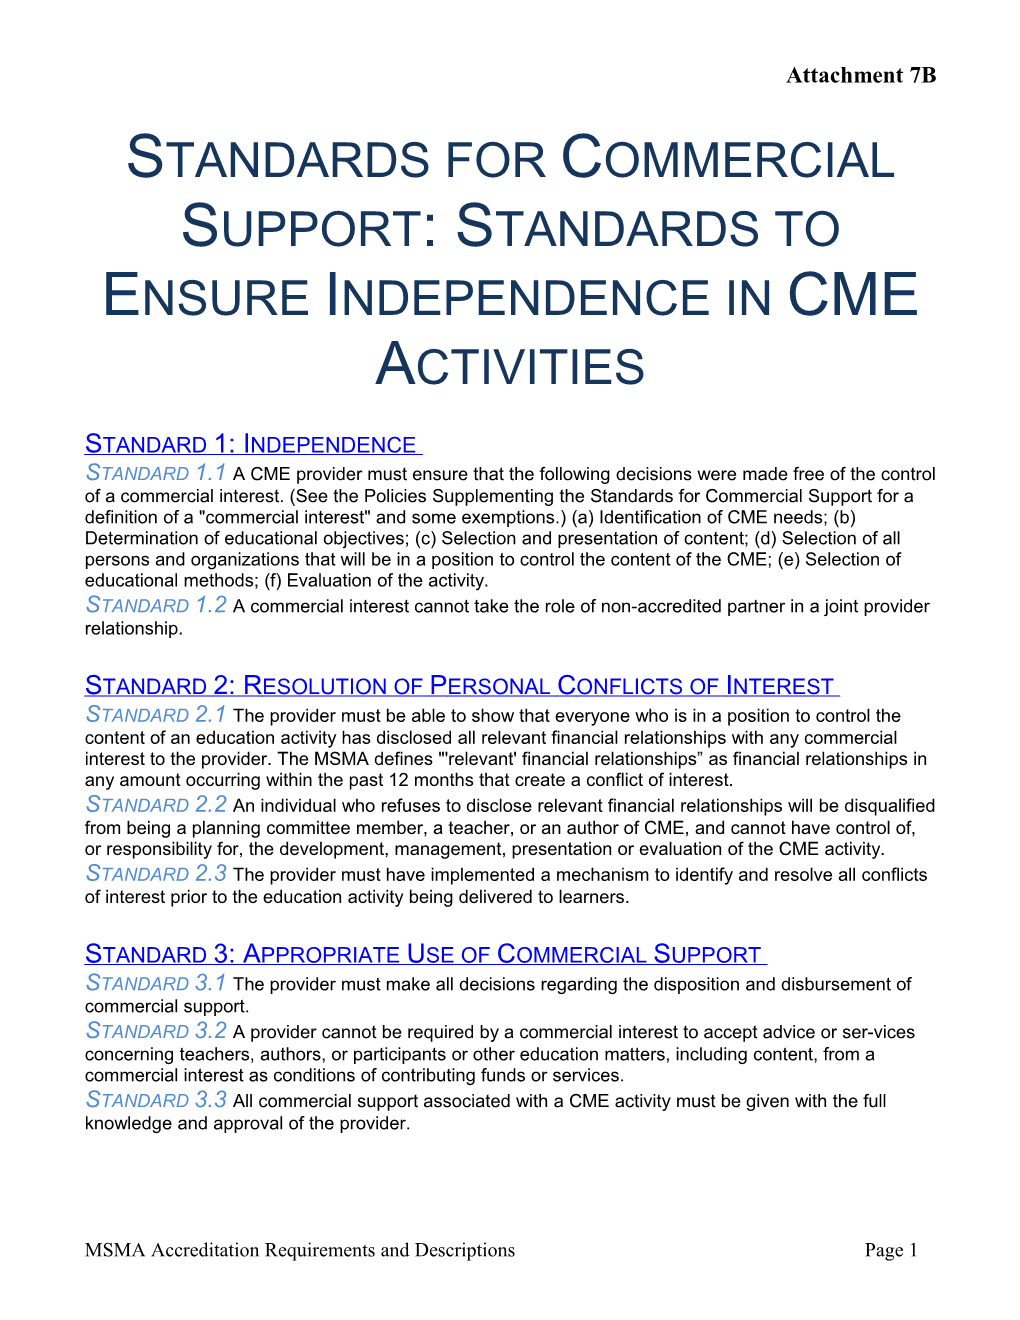 Standards for Commercial Support: Standards to Ensure Independence in Cme Activities